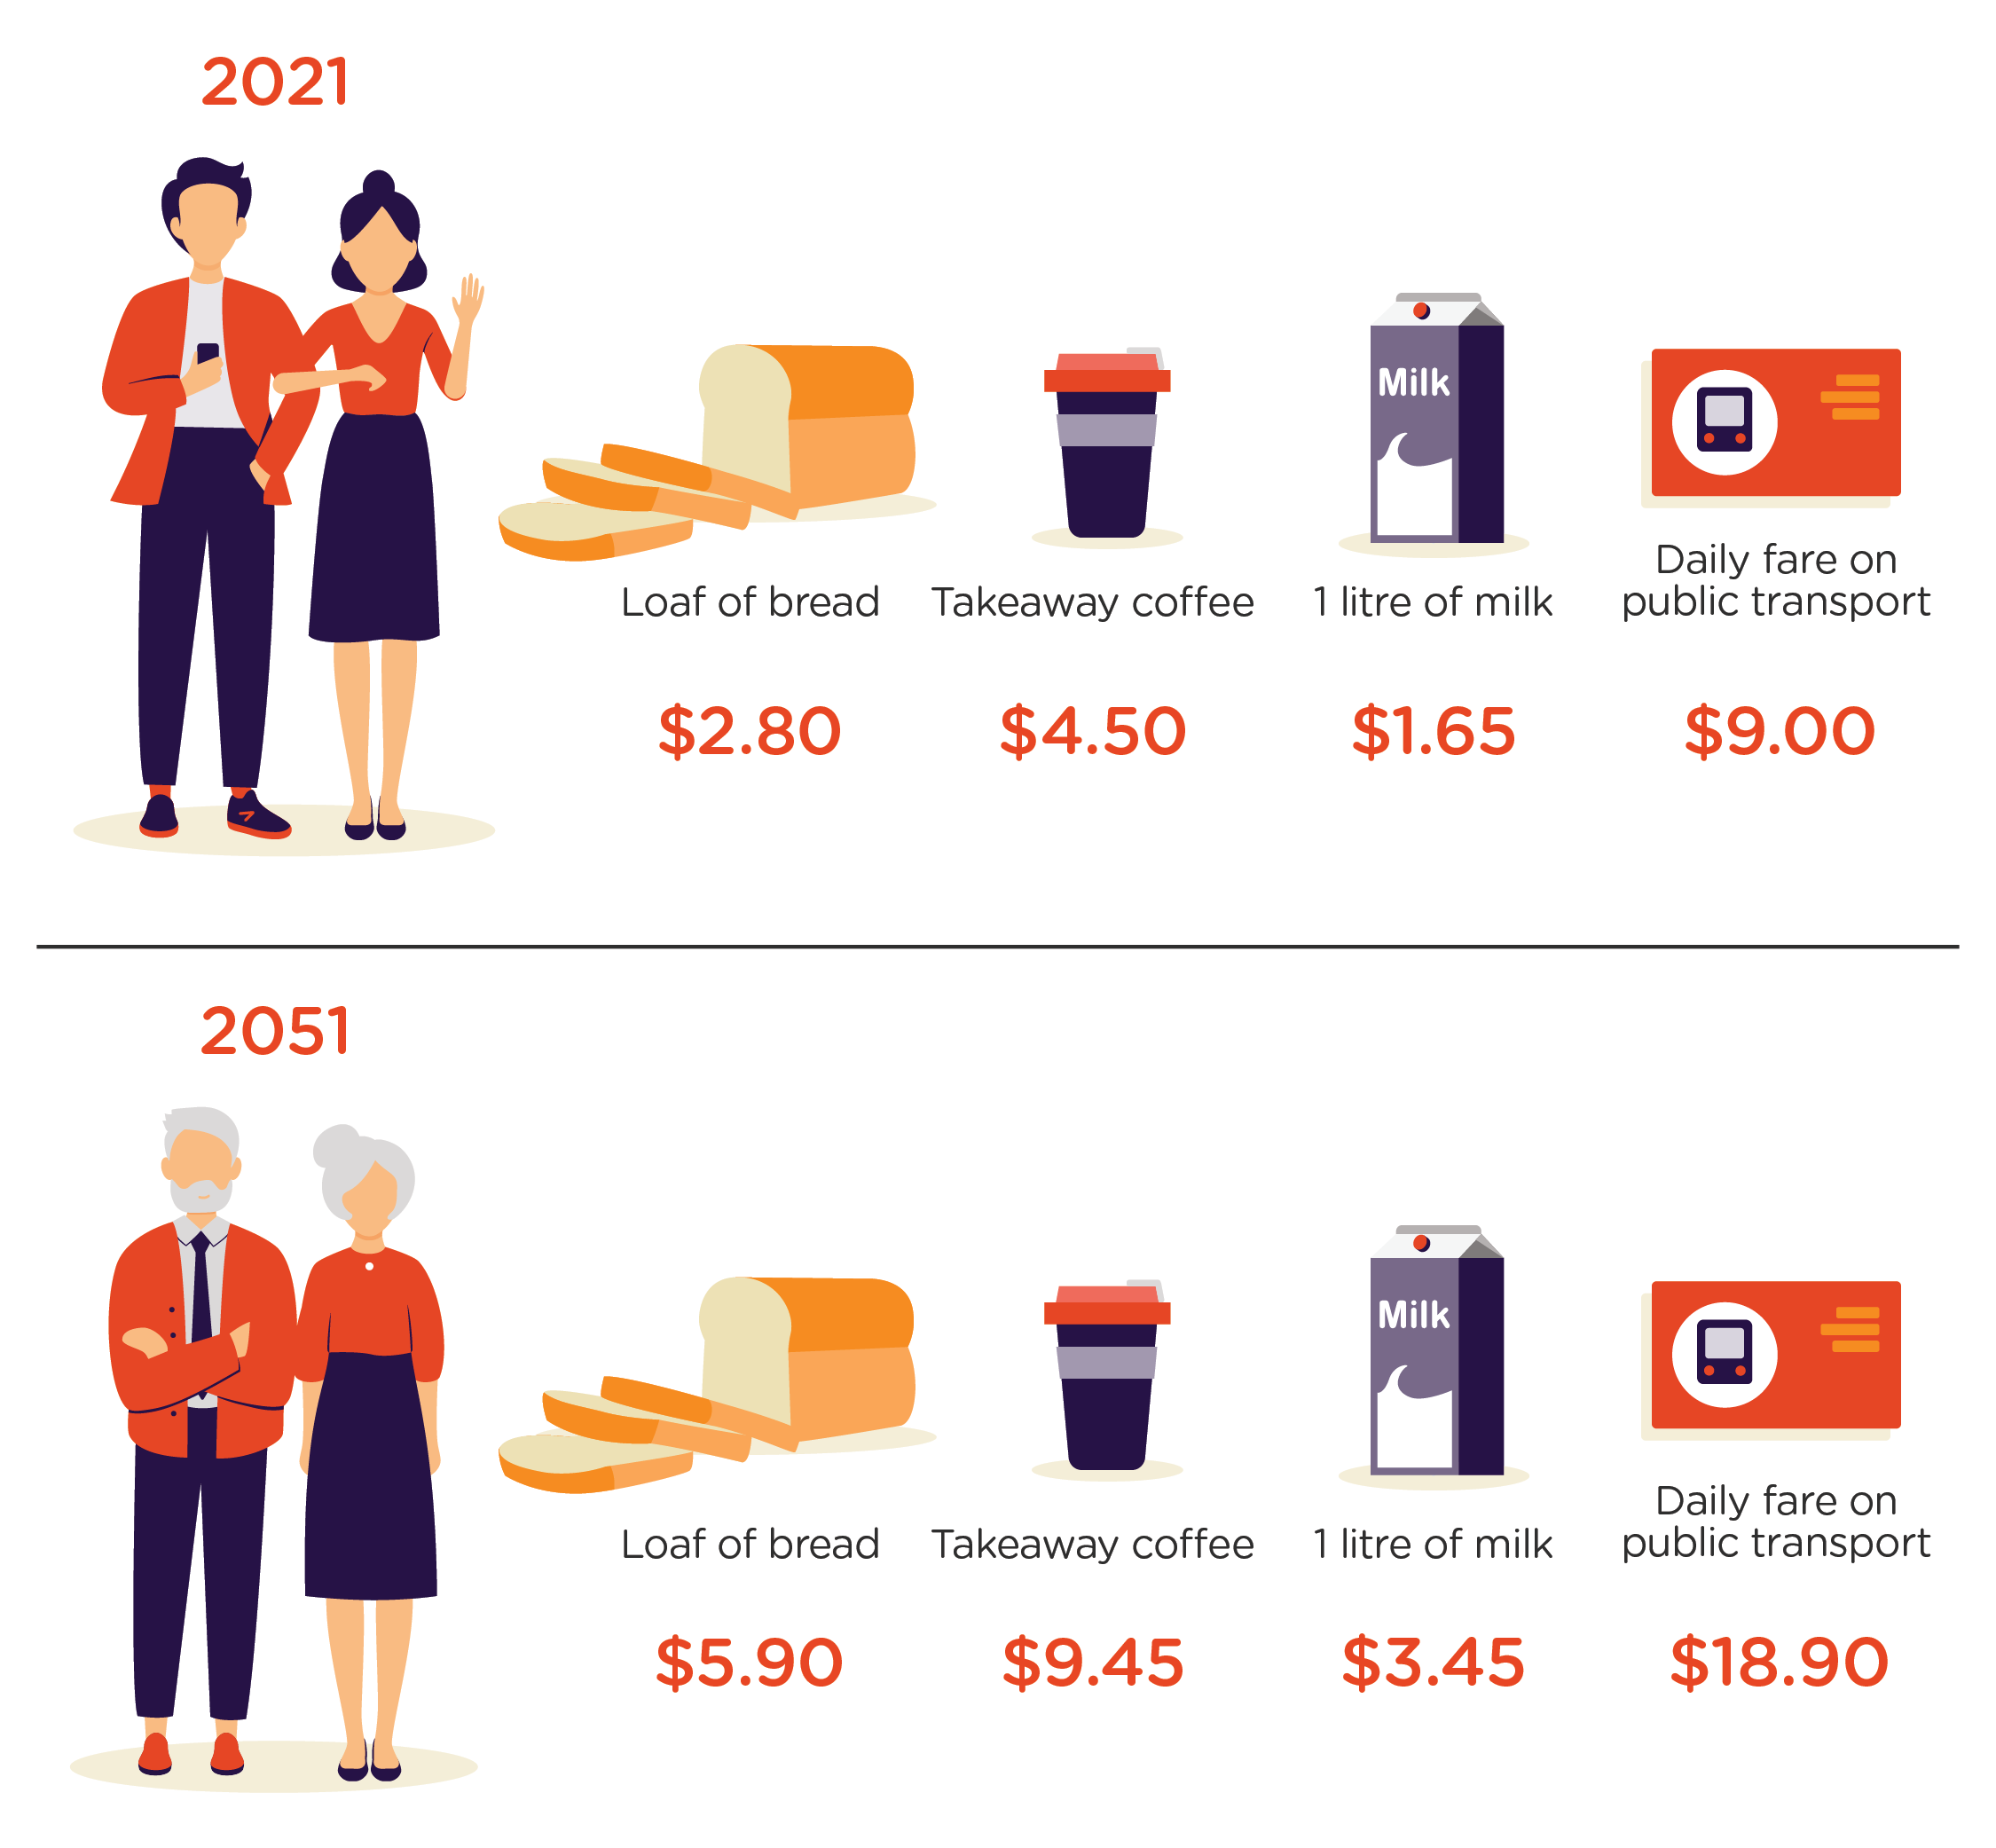 Visual shows the price of items like a loaf of bread ($2.80) and a litre of milk ($1.65) in 2021 and the forecast price of these items in 2051, assuming a 2.5% inflation rate each year." title="Visual shows the price of items like a loaf of bread ($2.80) and a litre of milk ($1.65) in 2021 and the forecast price of these items in 2051, assuming a 2.5% inflation rate each year.